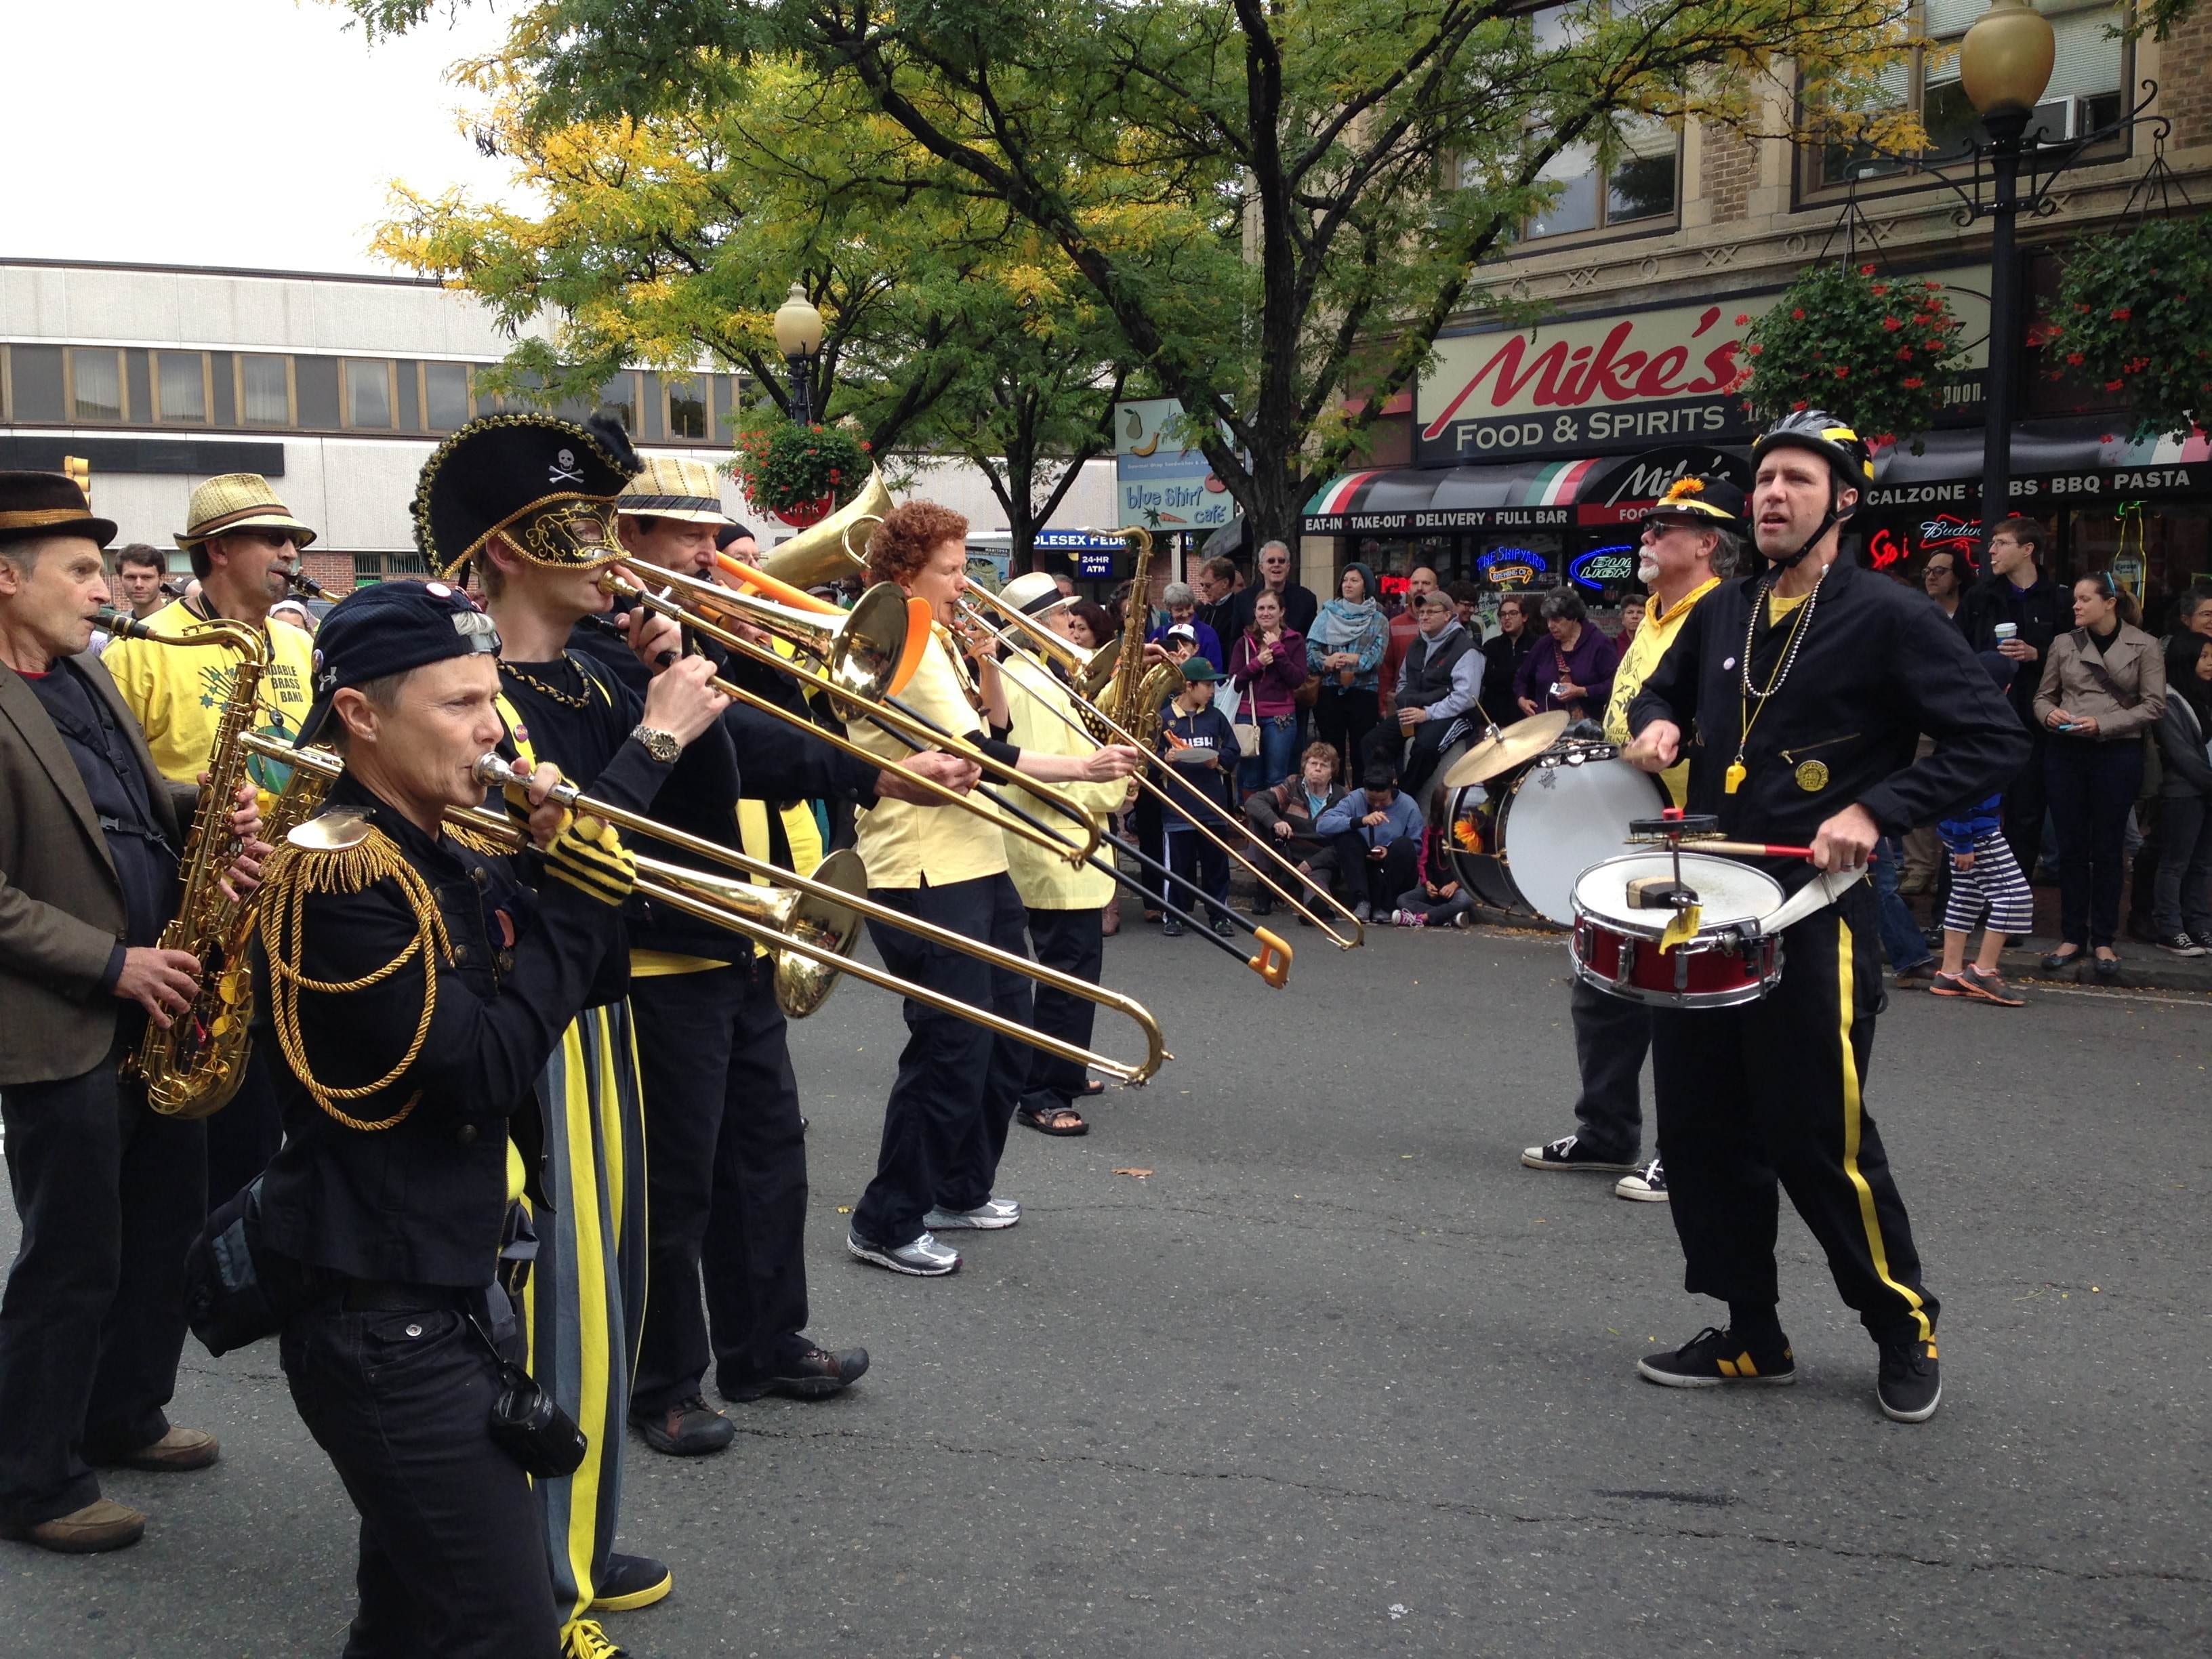 The EBB marching in a parade at HONK!